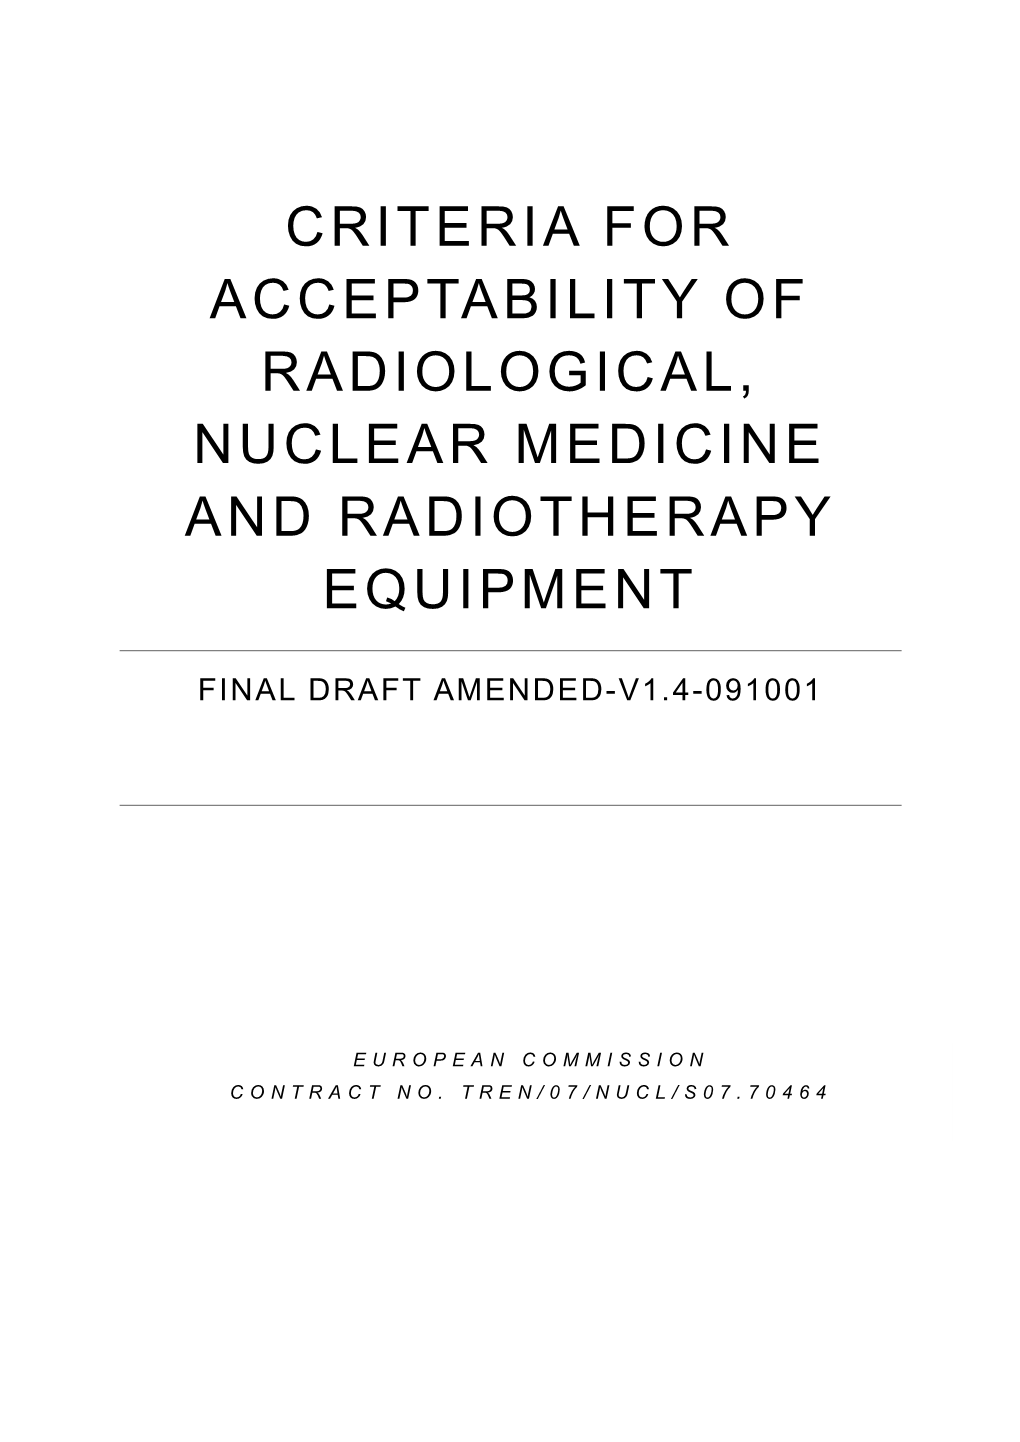 Criteria for Acceptability of Radiological, Nuclear Medicine and Radiotherapy Equipment